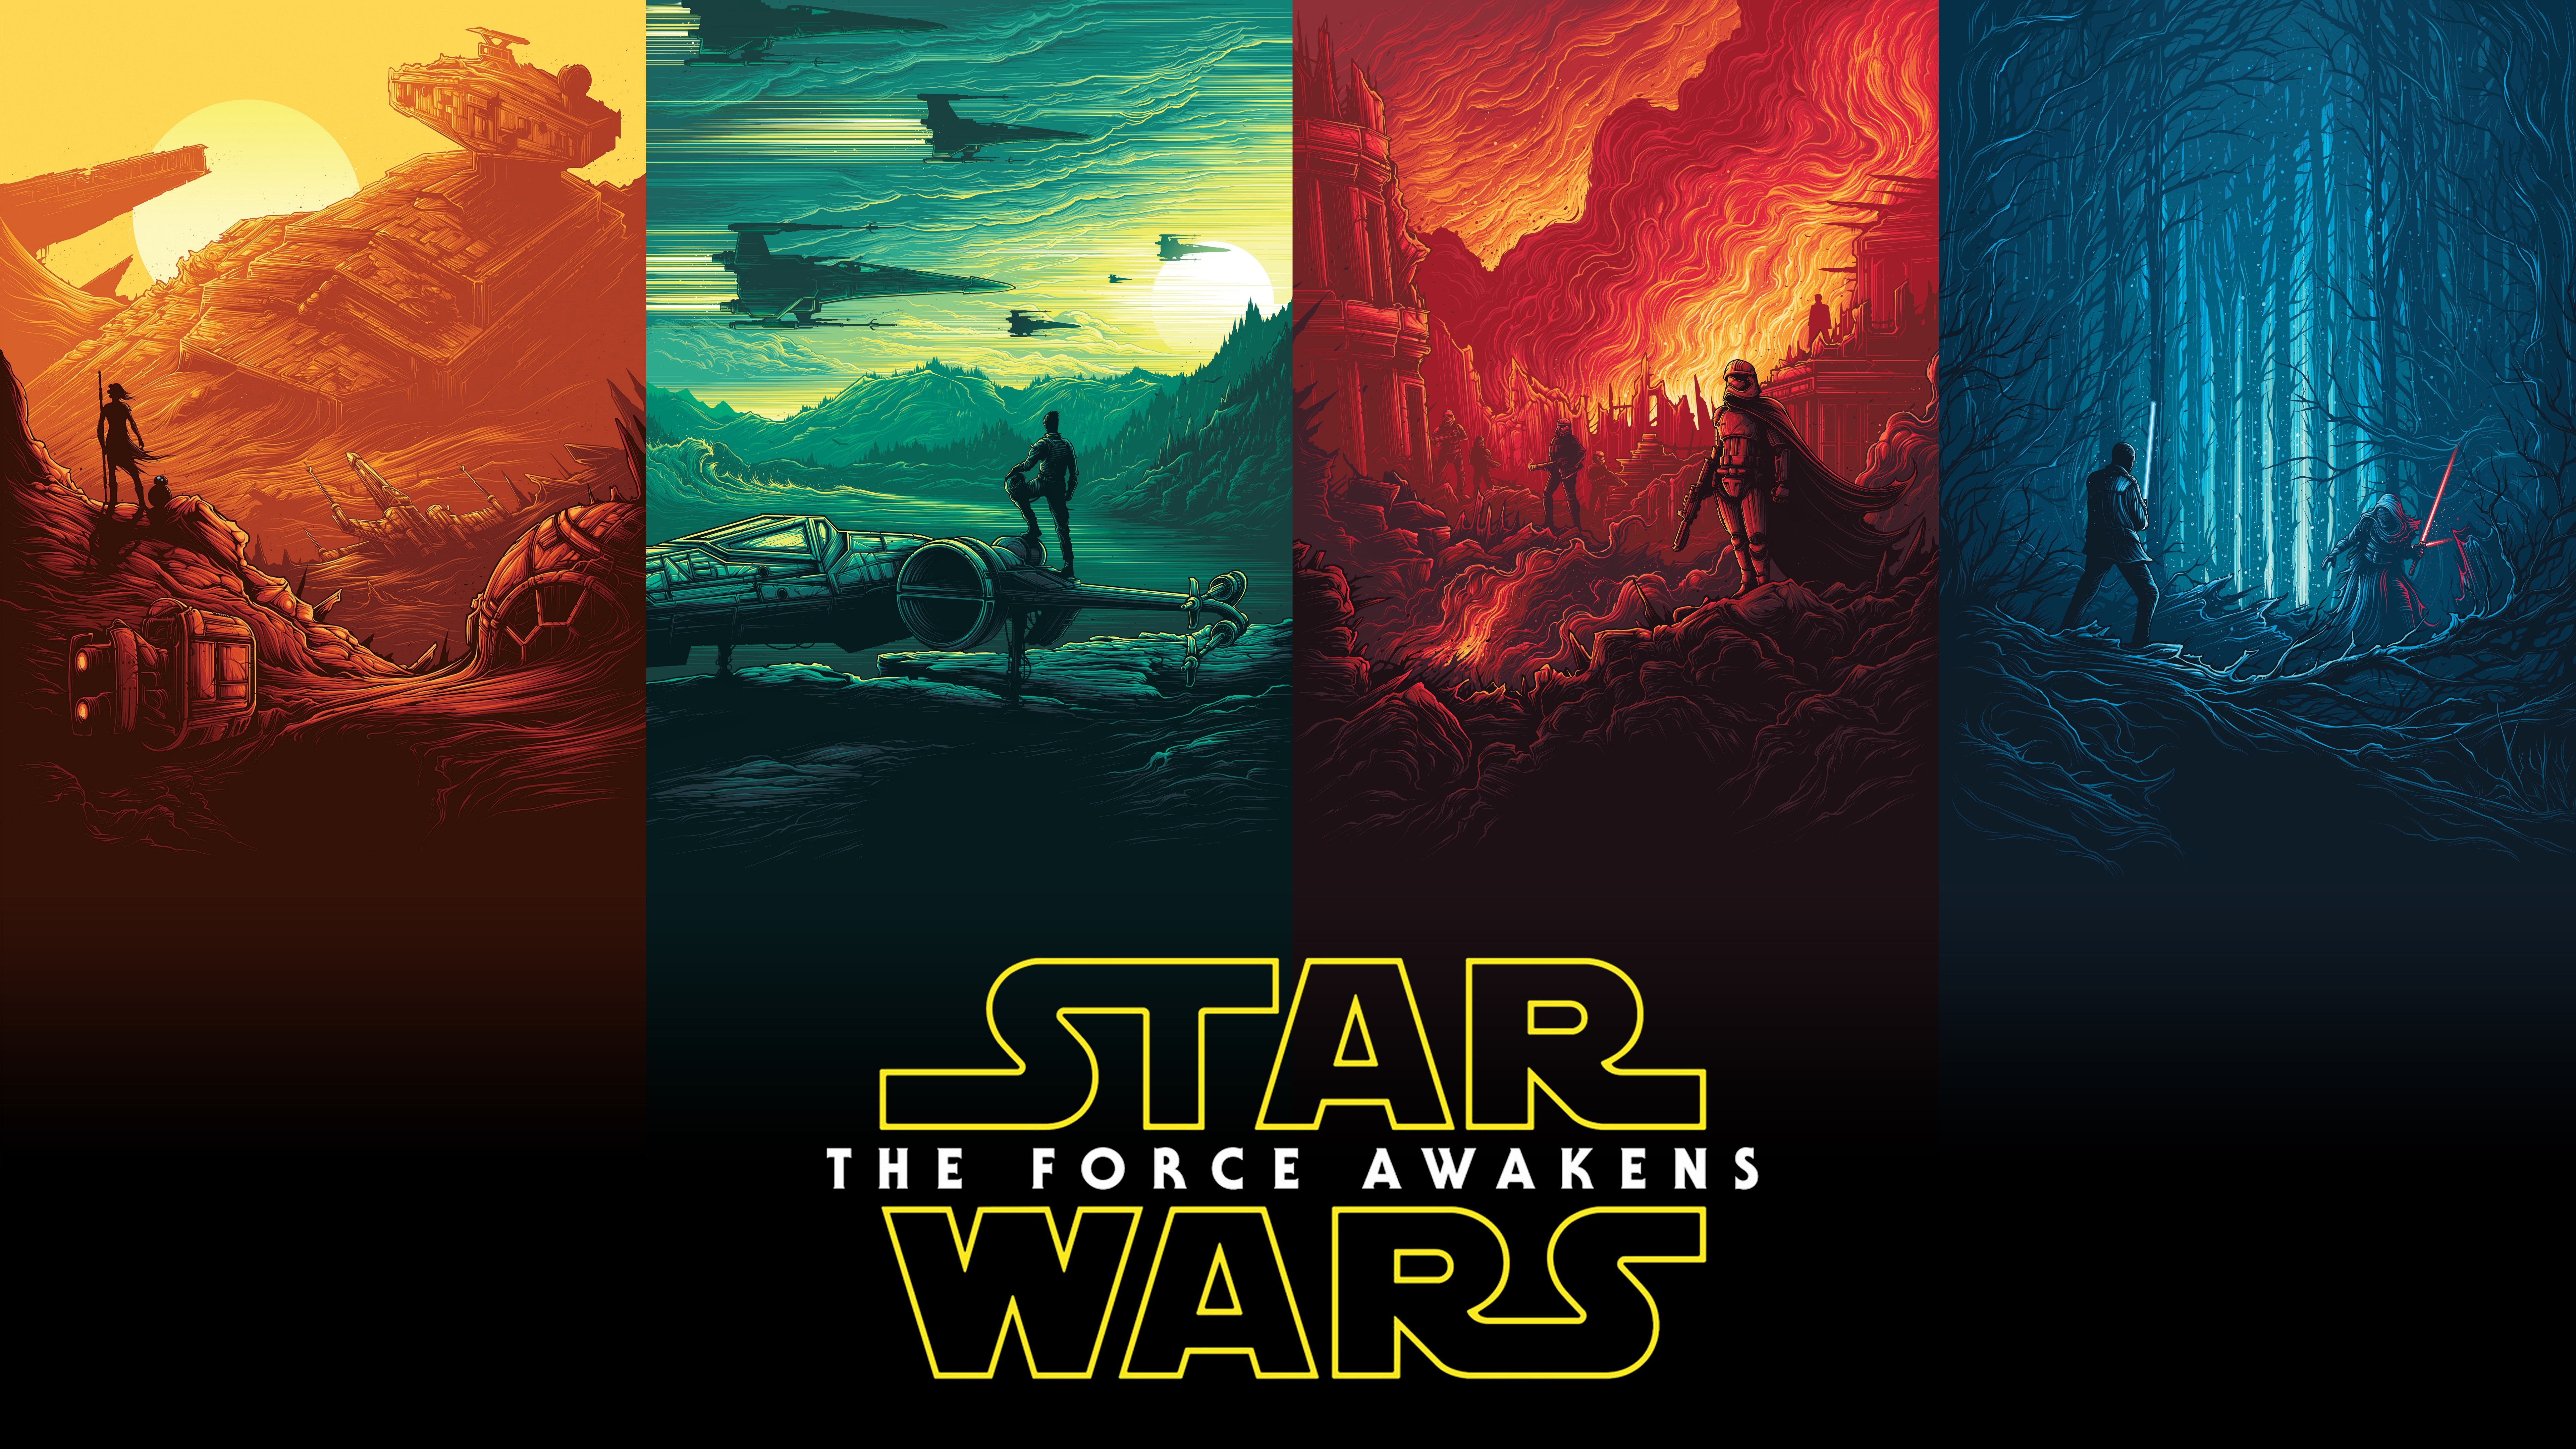 Free download Star Wars Backgrounds [7680x4320] for your Desktop